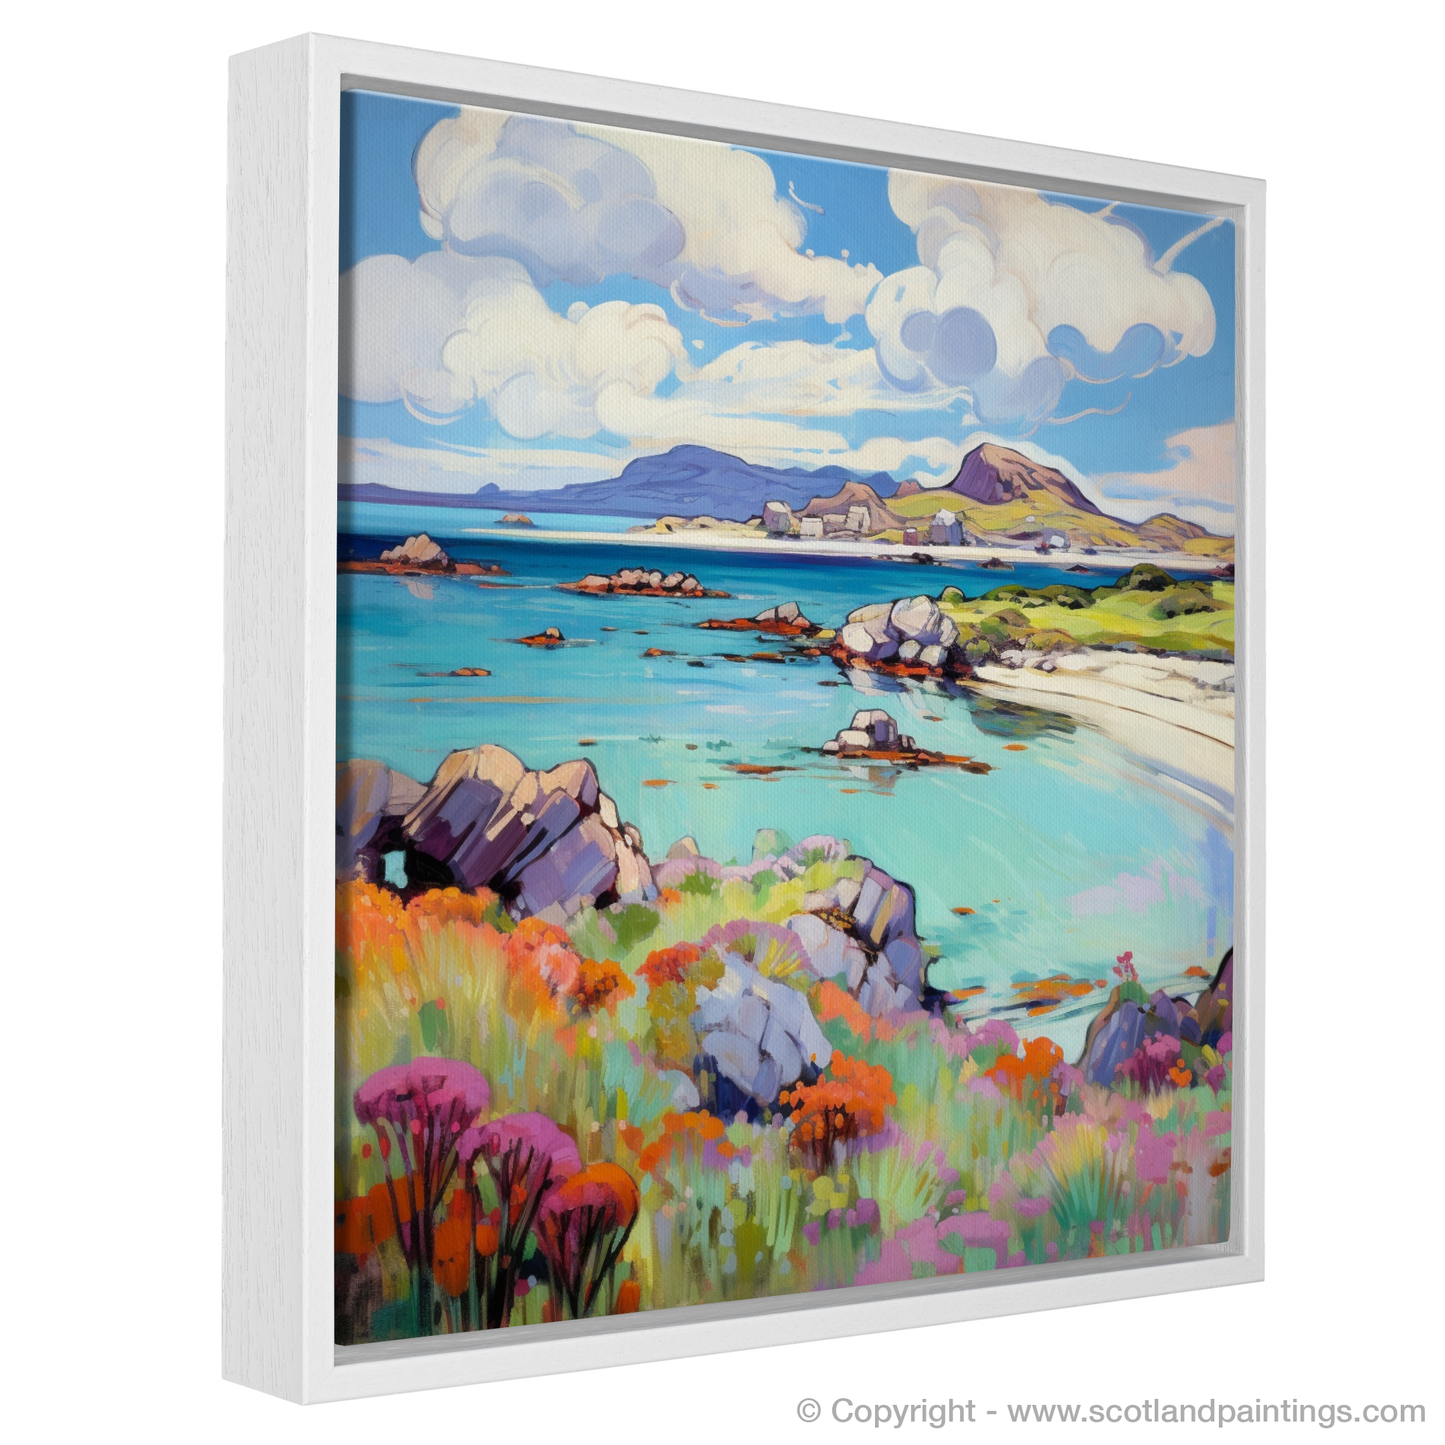 Painting and Art Print of Isle of Iona, Inner Hebrides in summer entitled "Summer Serenity on Isle of Iona: A Fauvist Tribute".